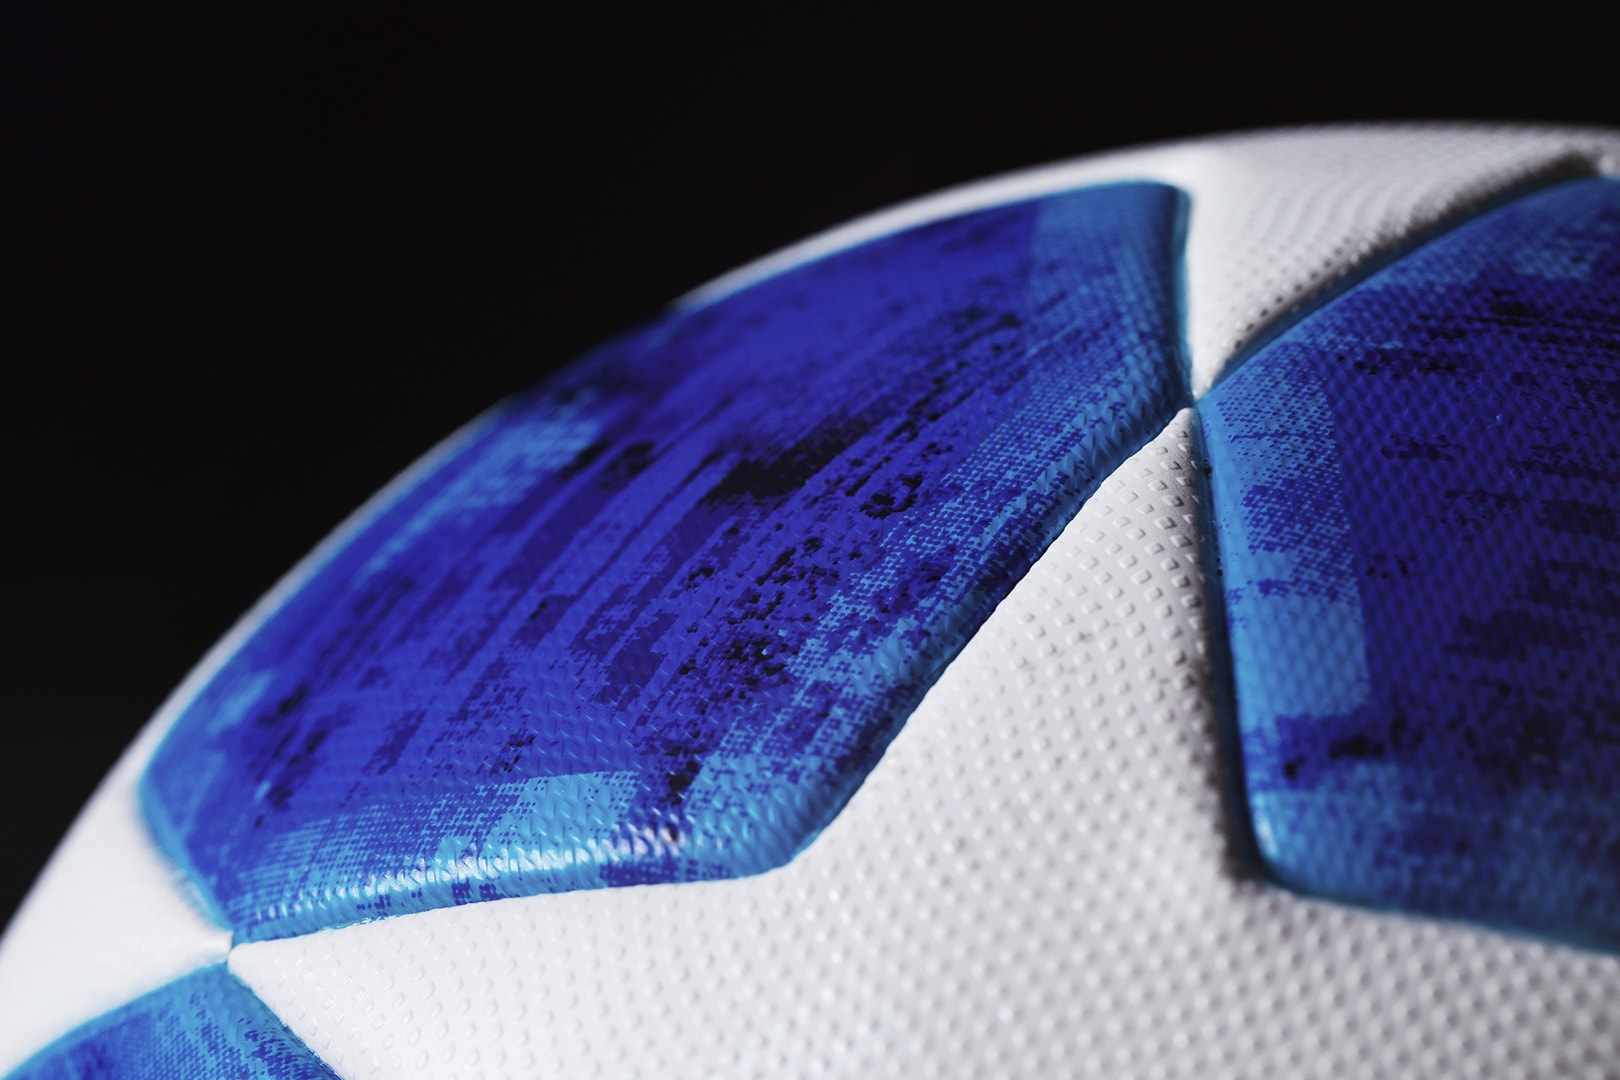 adidas Release The 2018/19 Champions League Official Match Ball -  SoccerBible